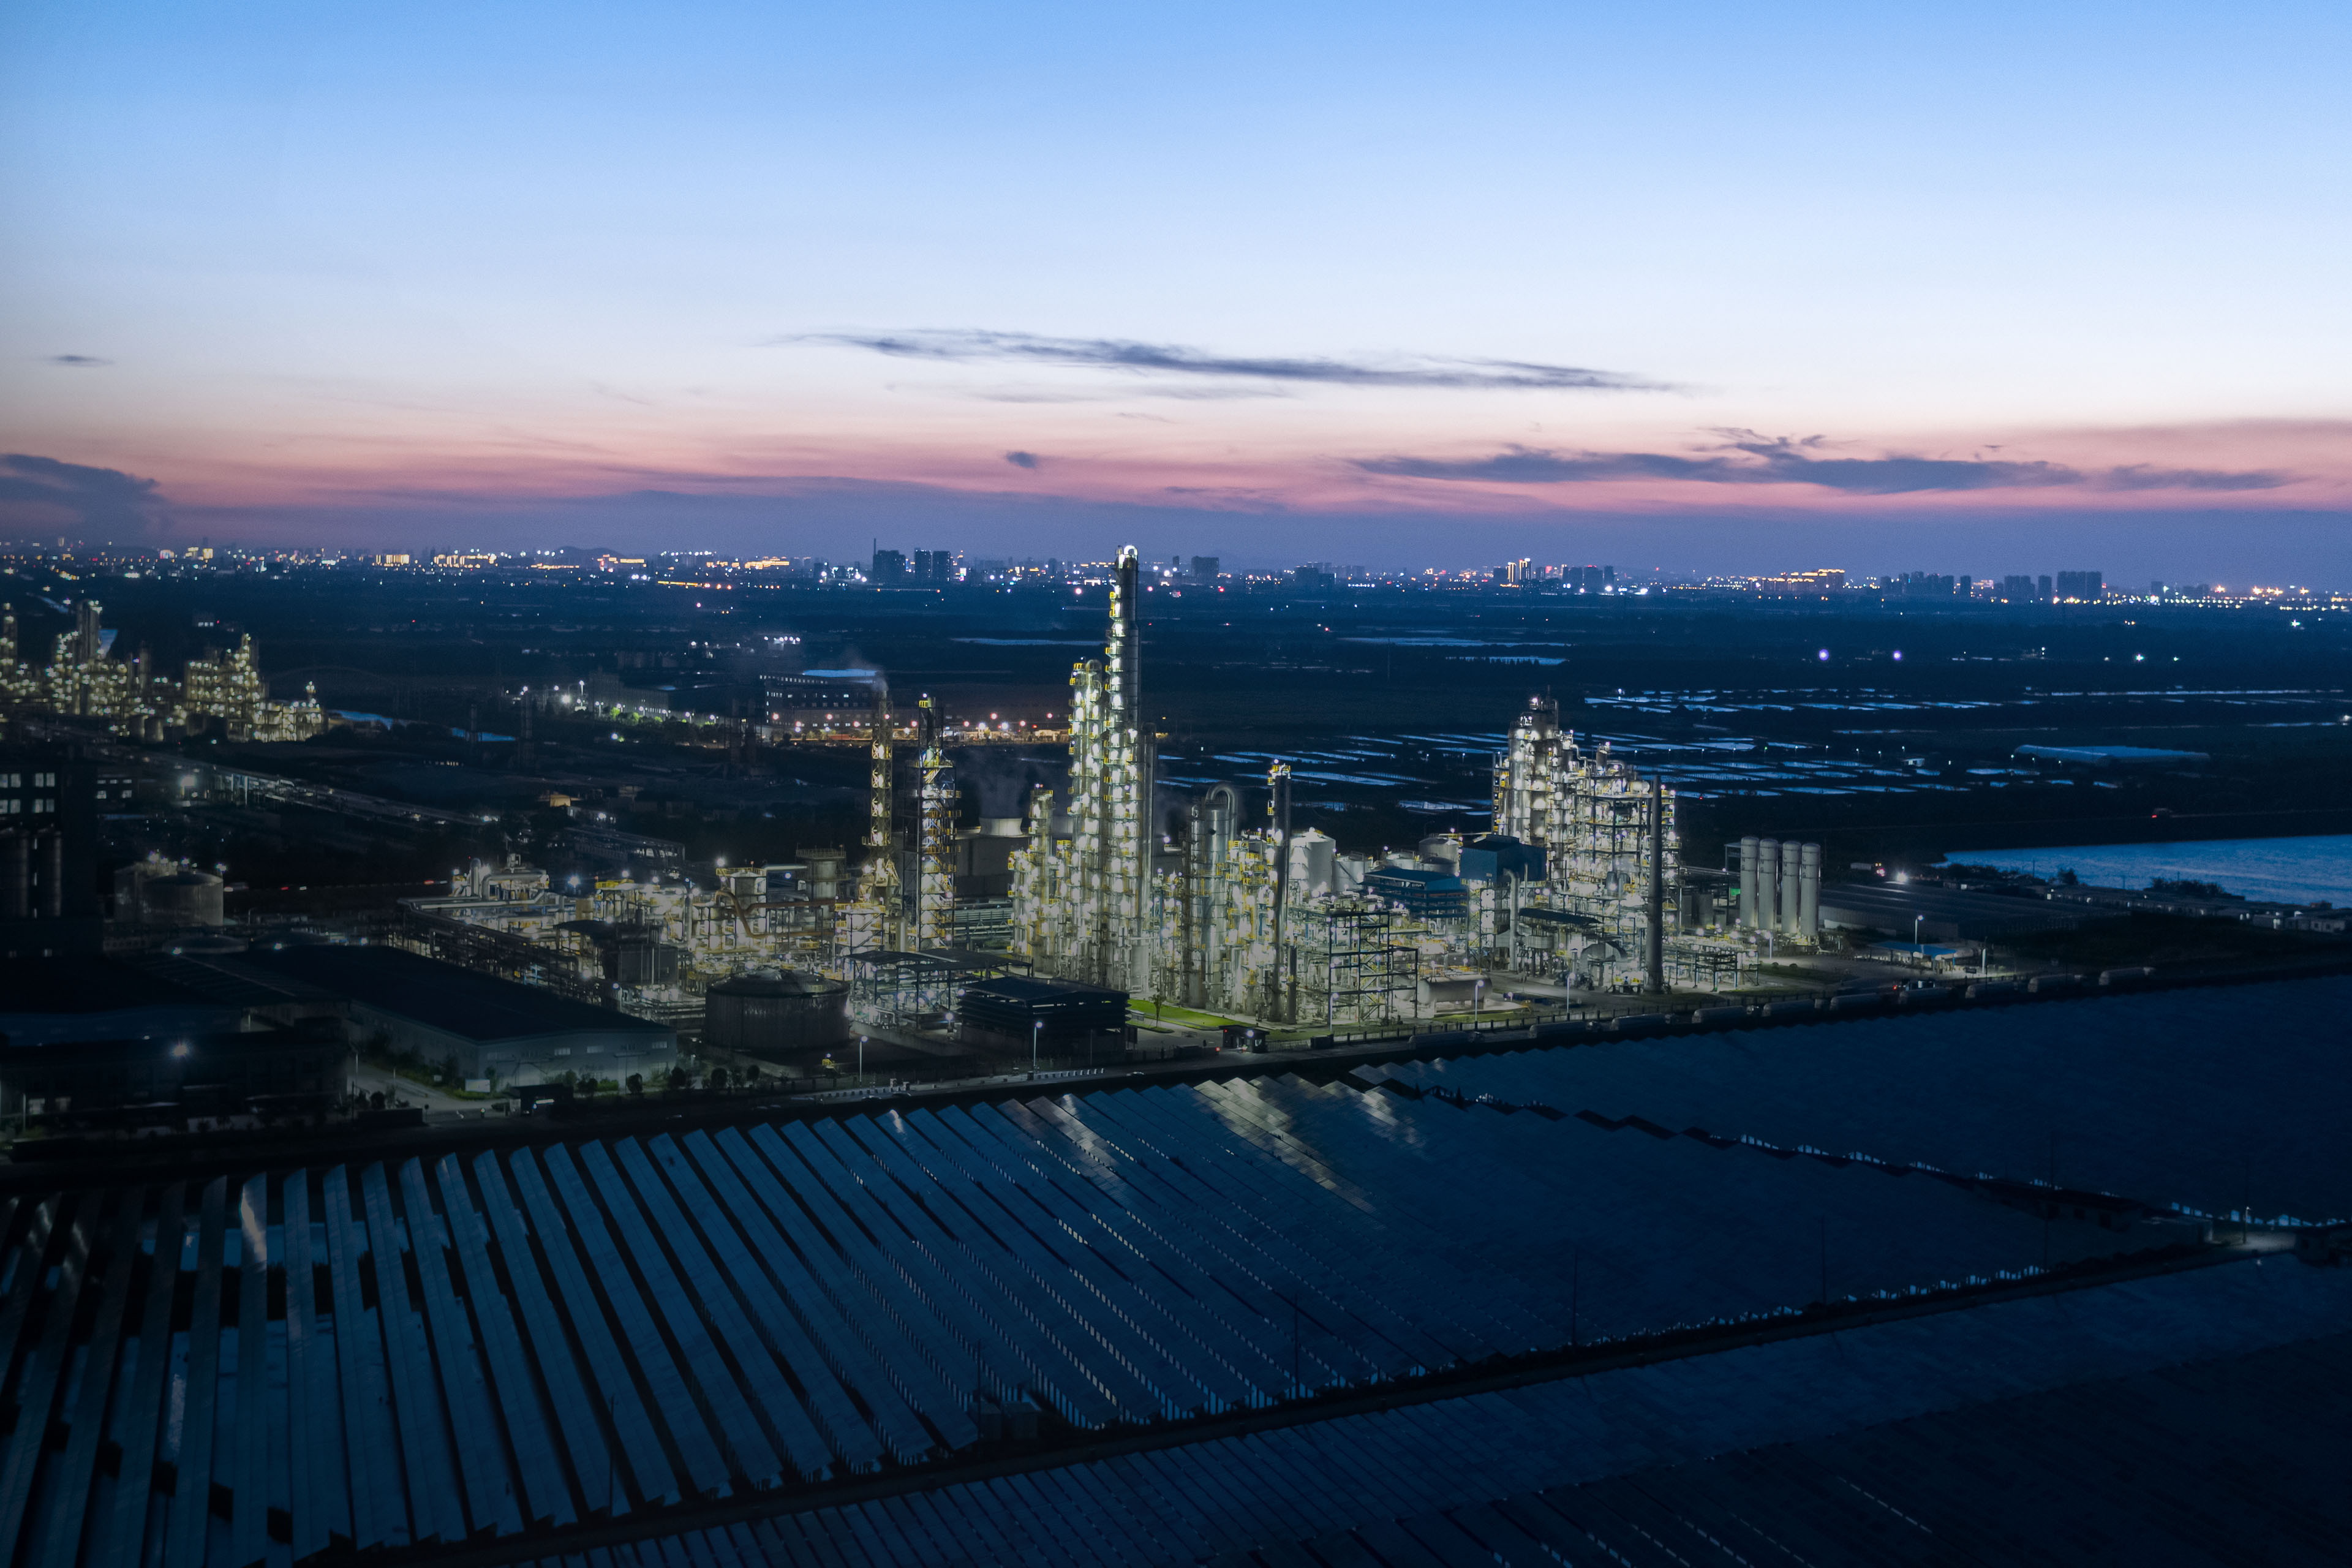 Chemical plant with solar power station at night